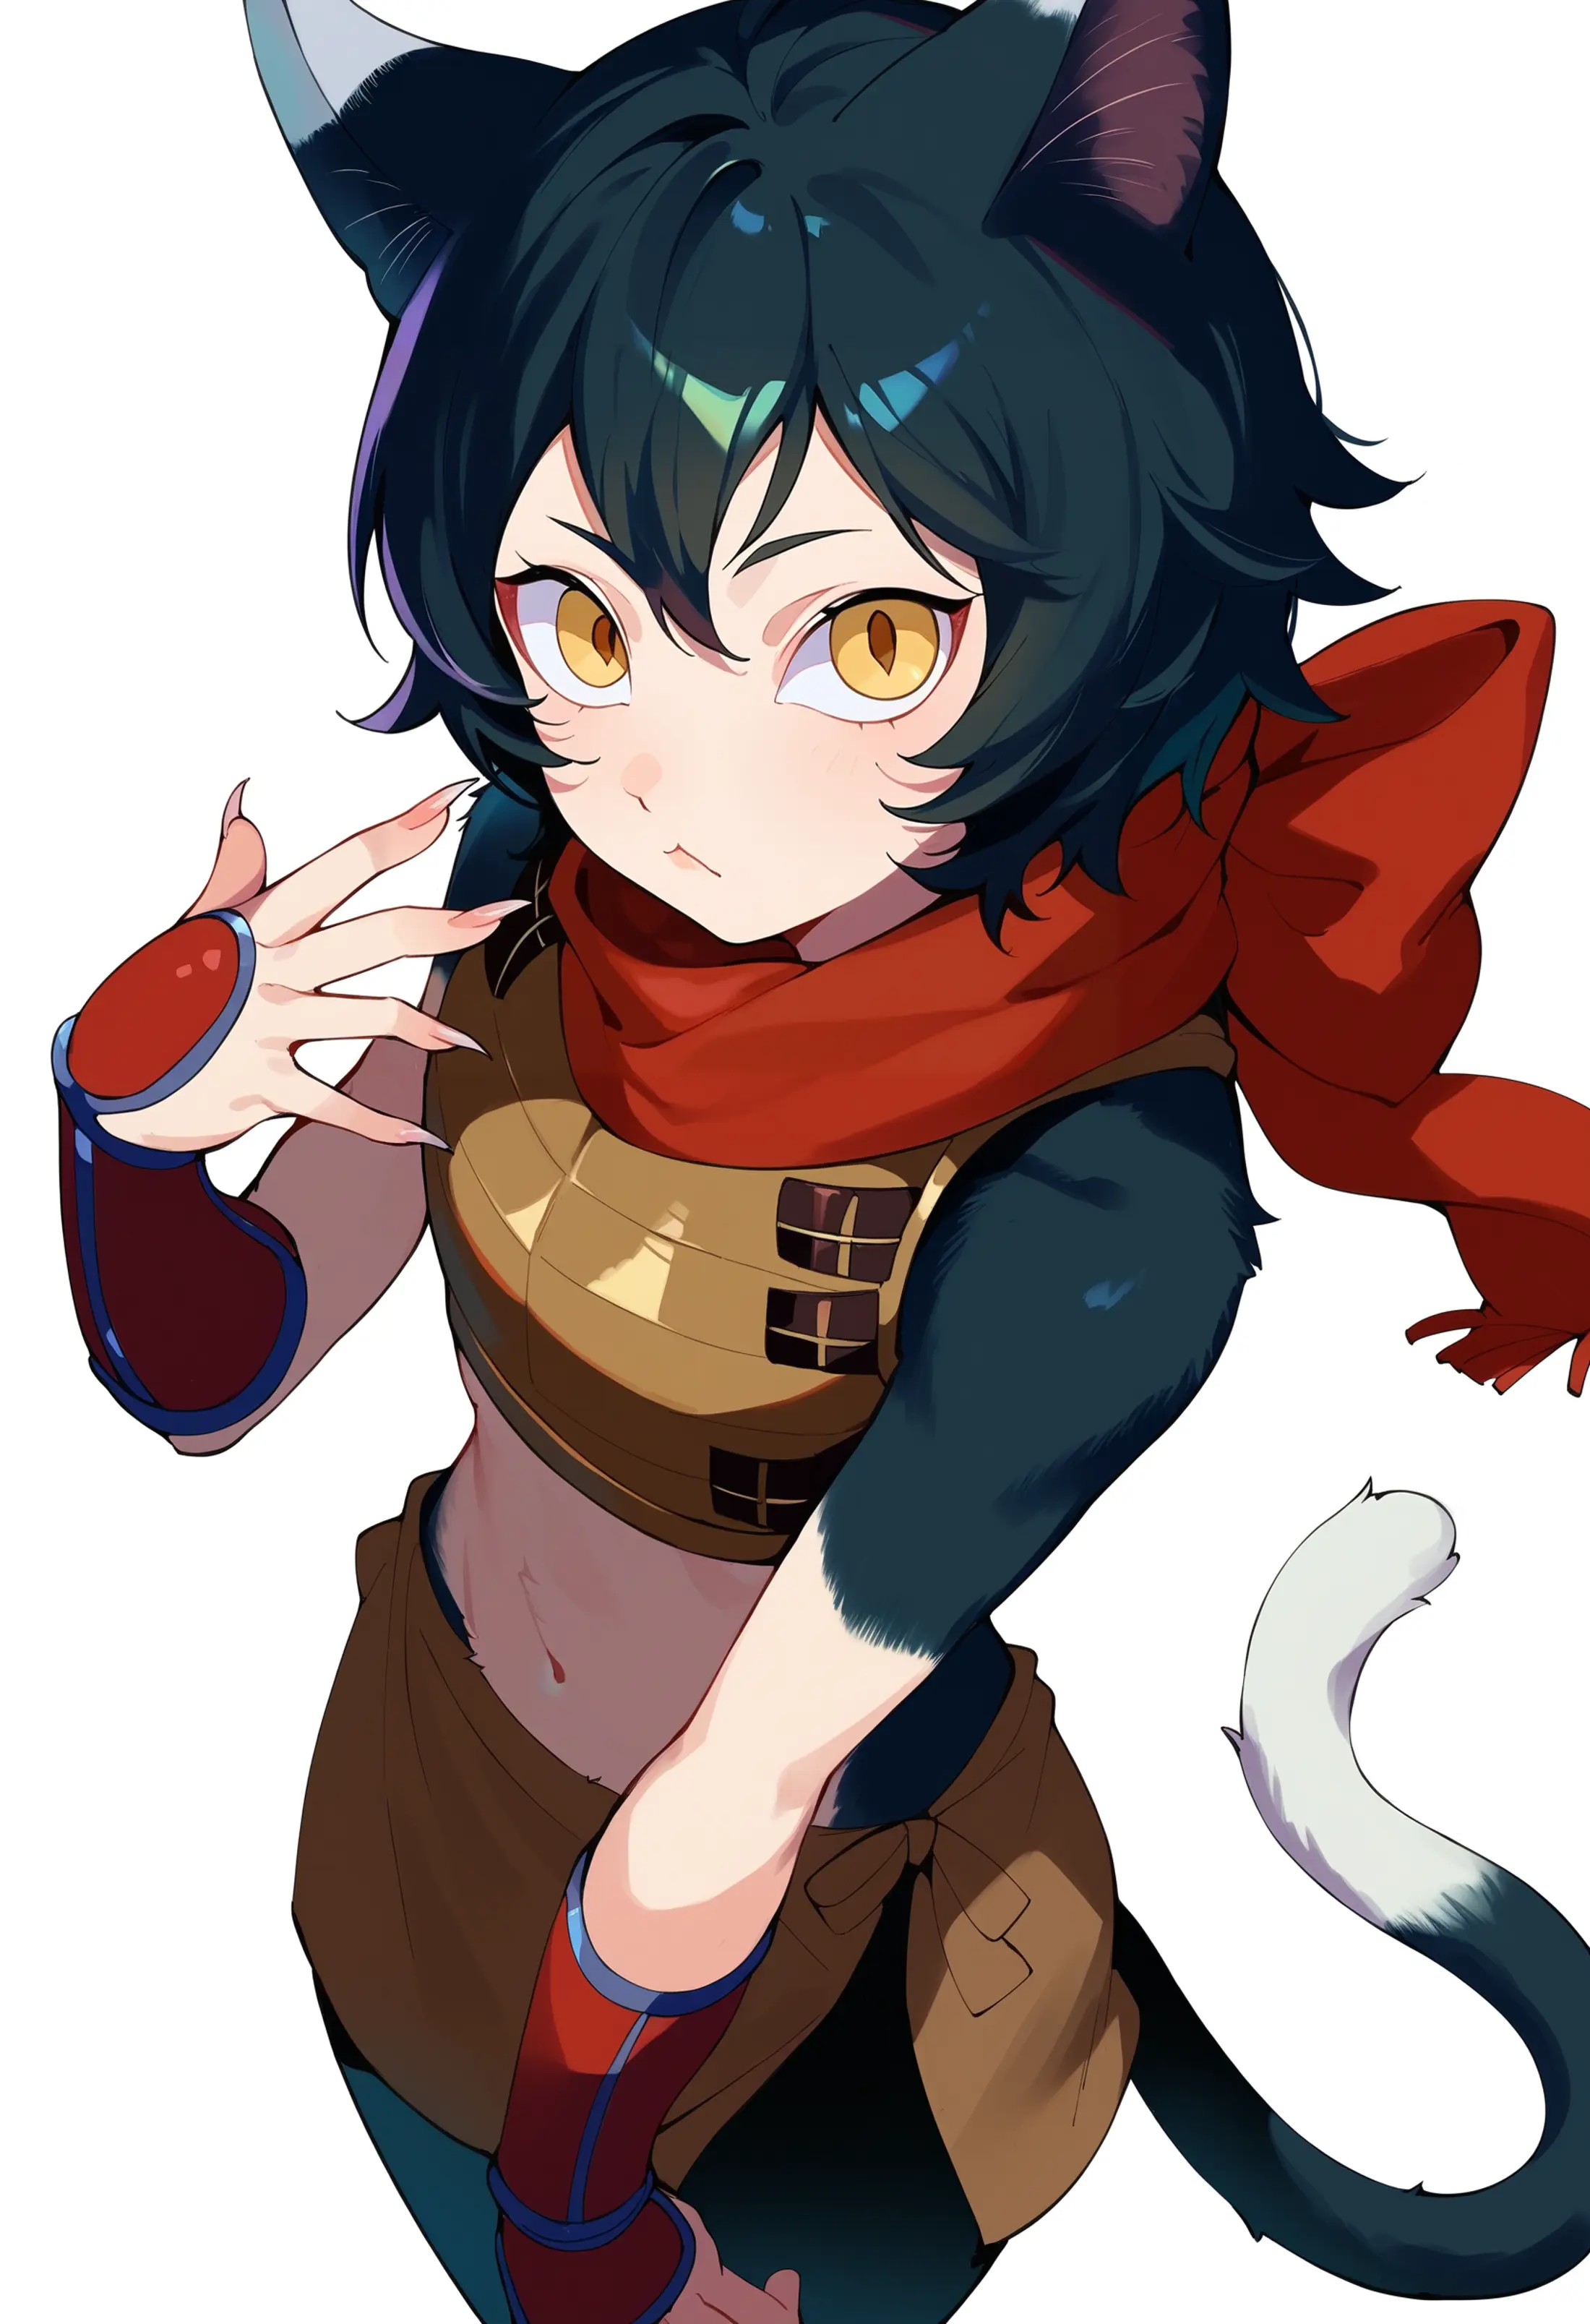 A girl with feline features dressed in an adventurous outfit with a red scarf, leather breastplate, and gauntlets. She has large yellow eyes and black hair covering her head and parts of her body. 